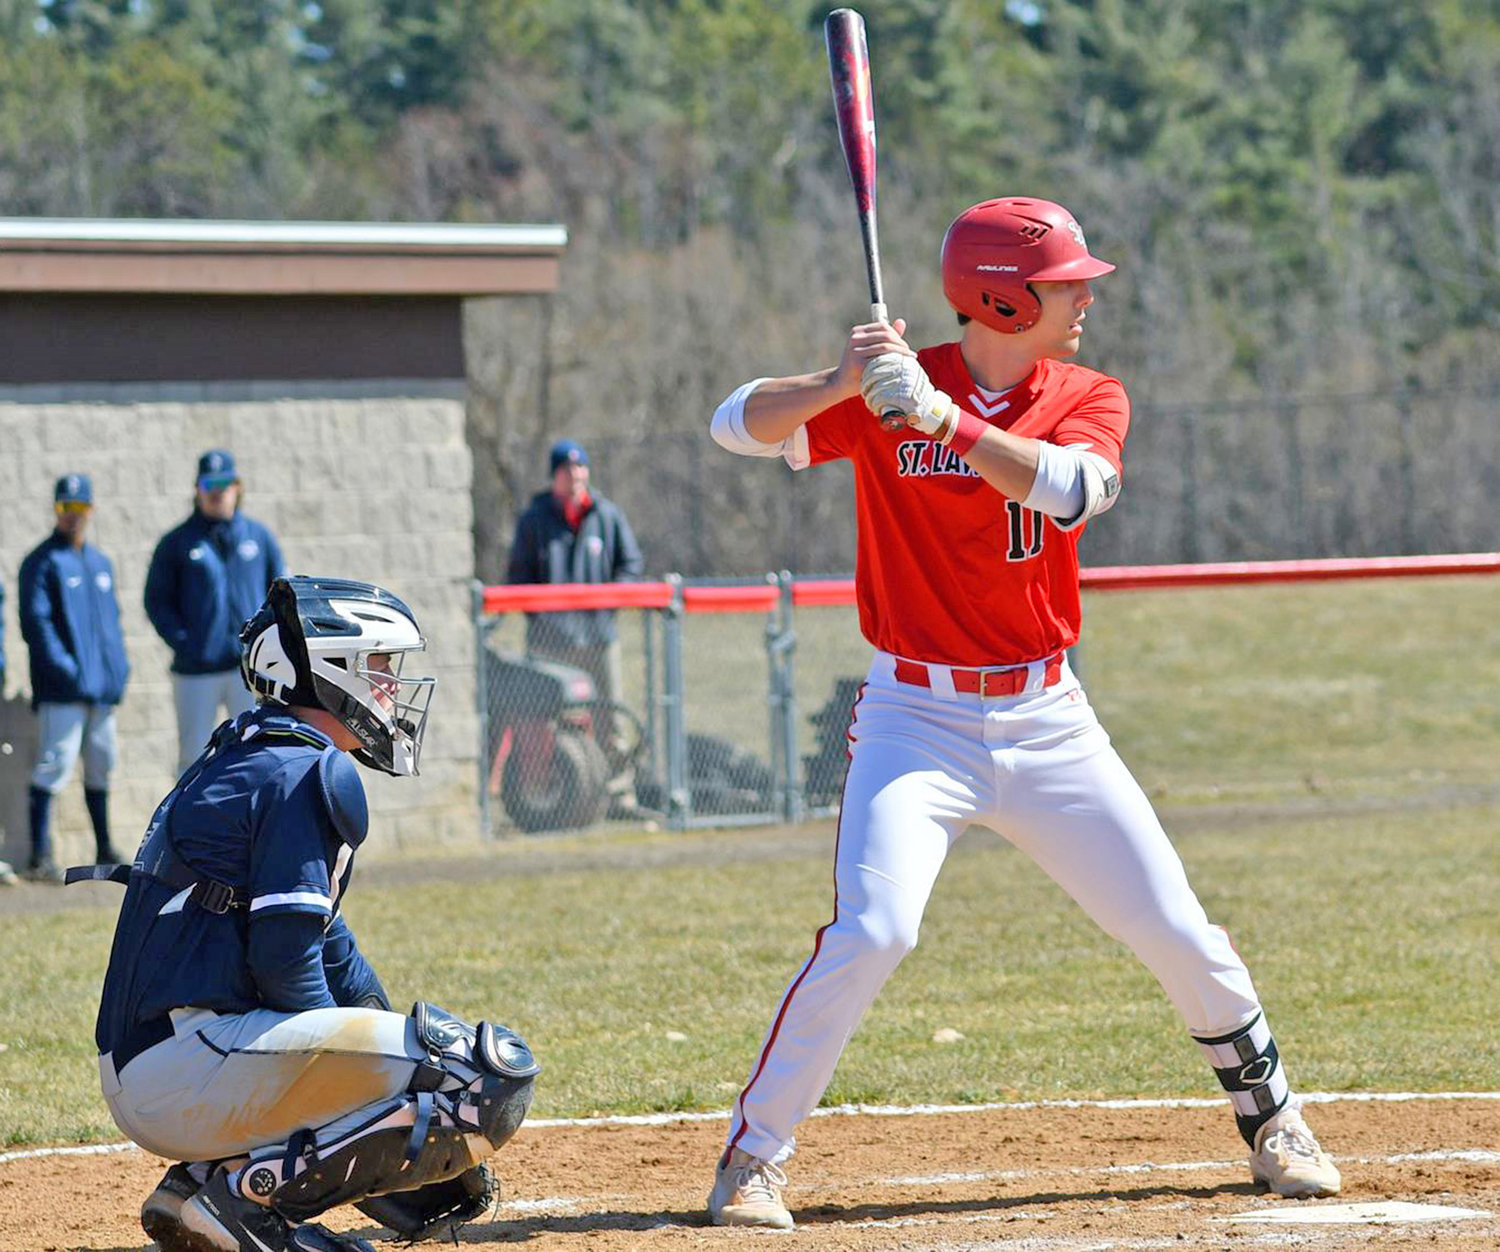 St. Lawrence University senior Andrew Circelli of New Hartford has been on a tear this season at the plate. He homered in four of last week's five games. Earlier this season he hit three home runs in a game. His single-season total of 11 homers and his career total of 18 are both program records for the Saints.